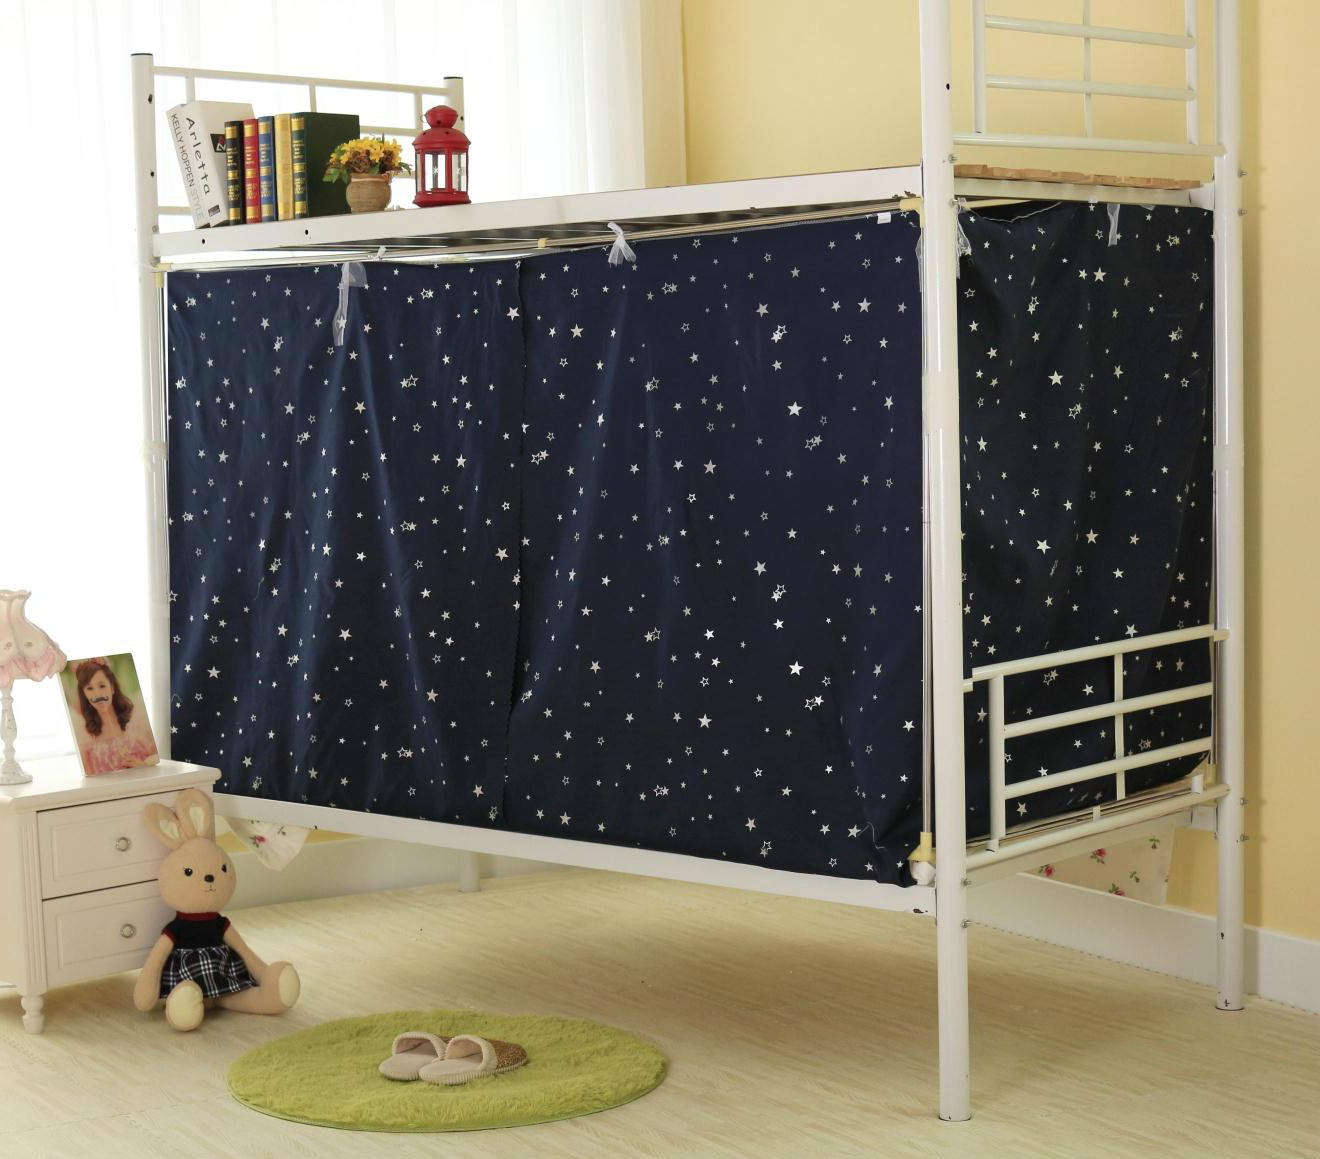 College Dormitory Bedroom Curtains, Bunk Bed Curtains Dorm